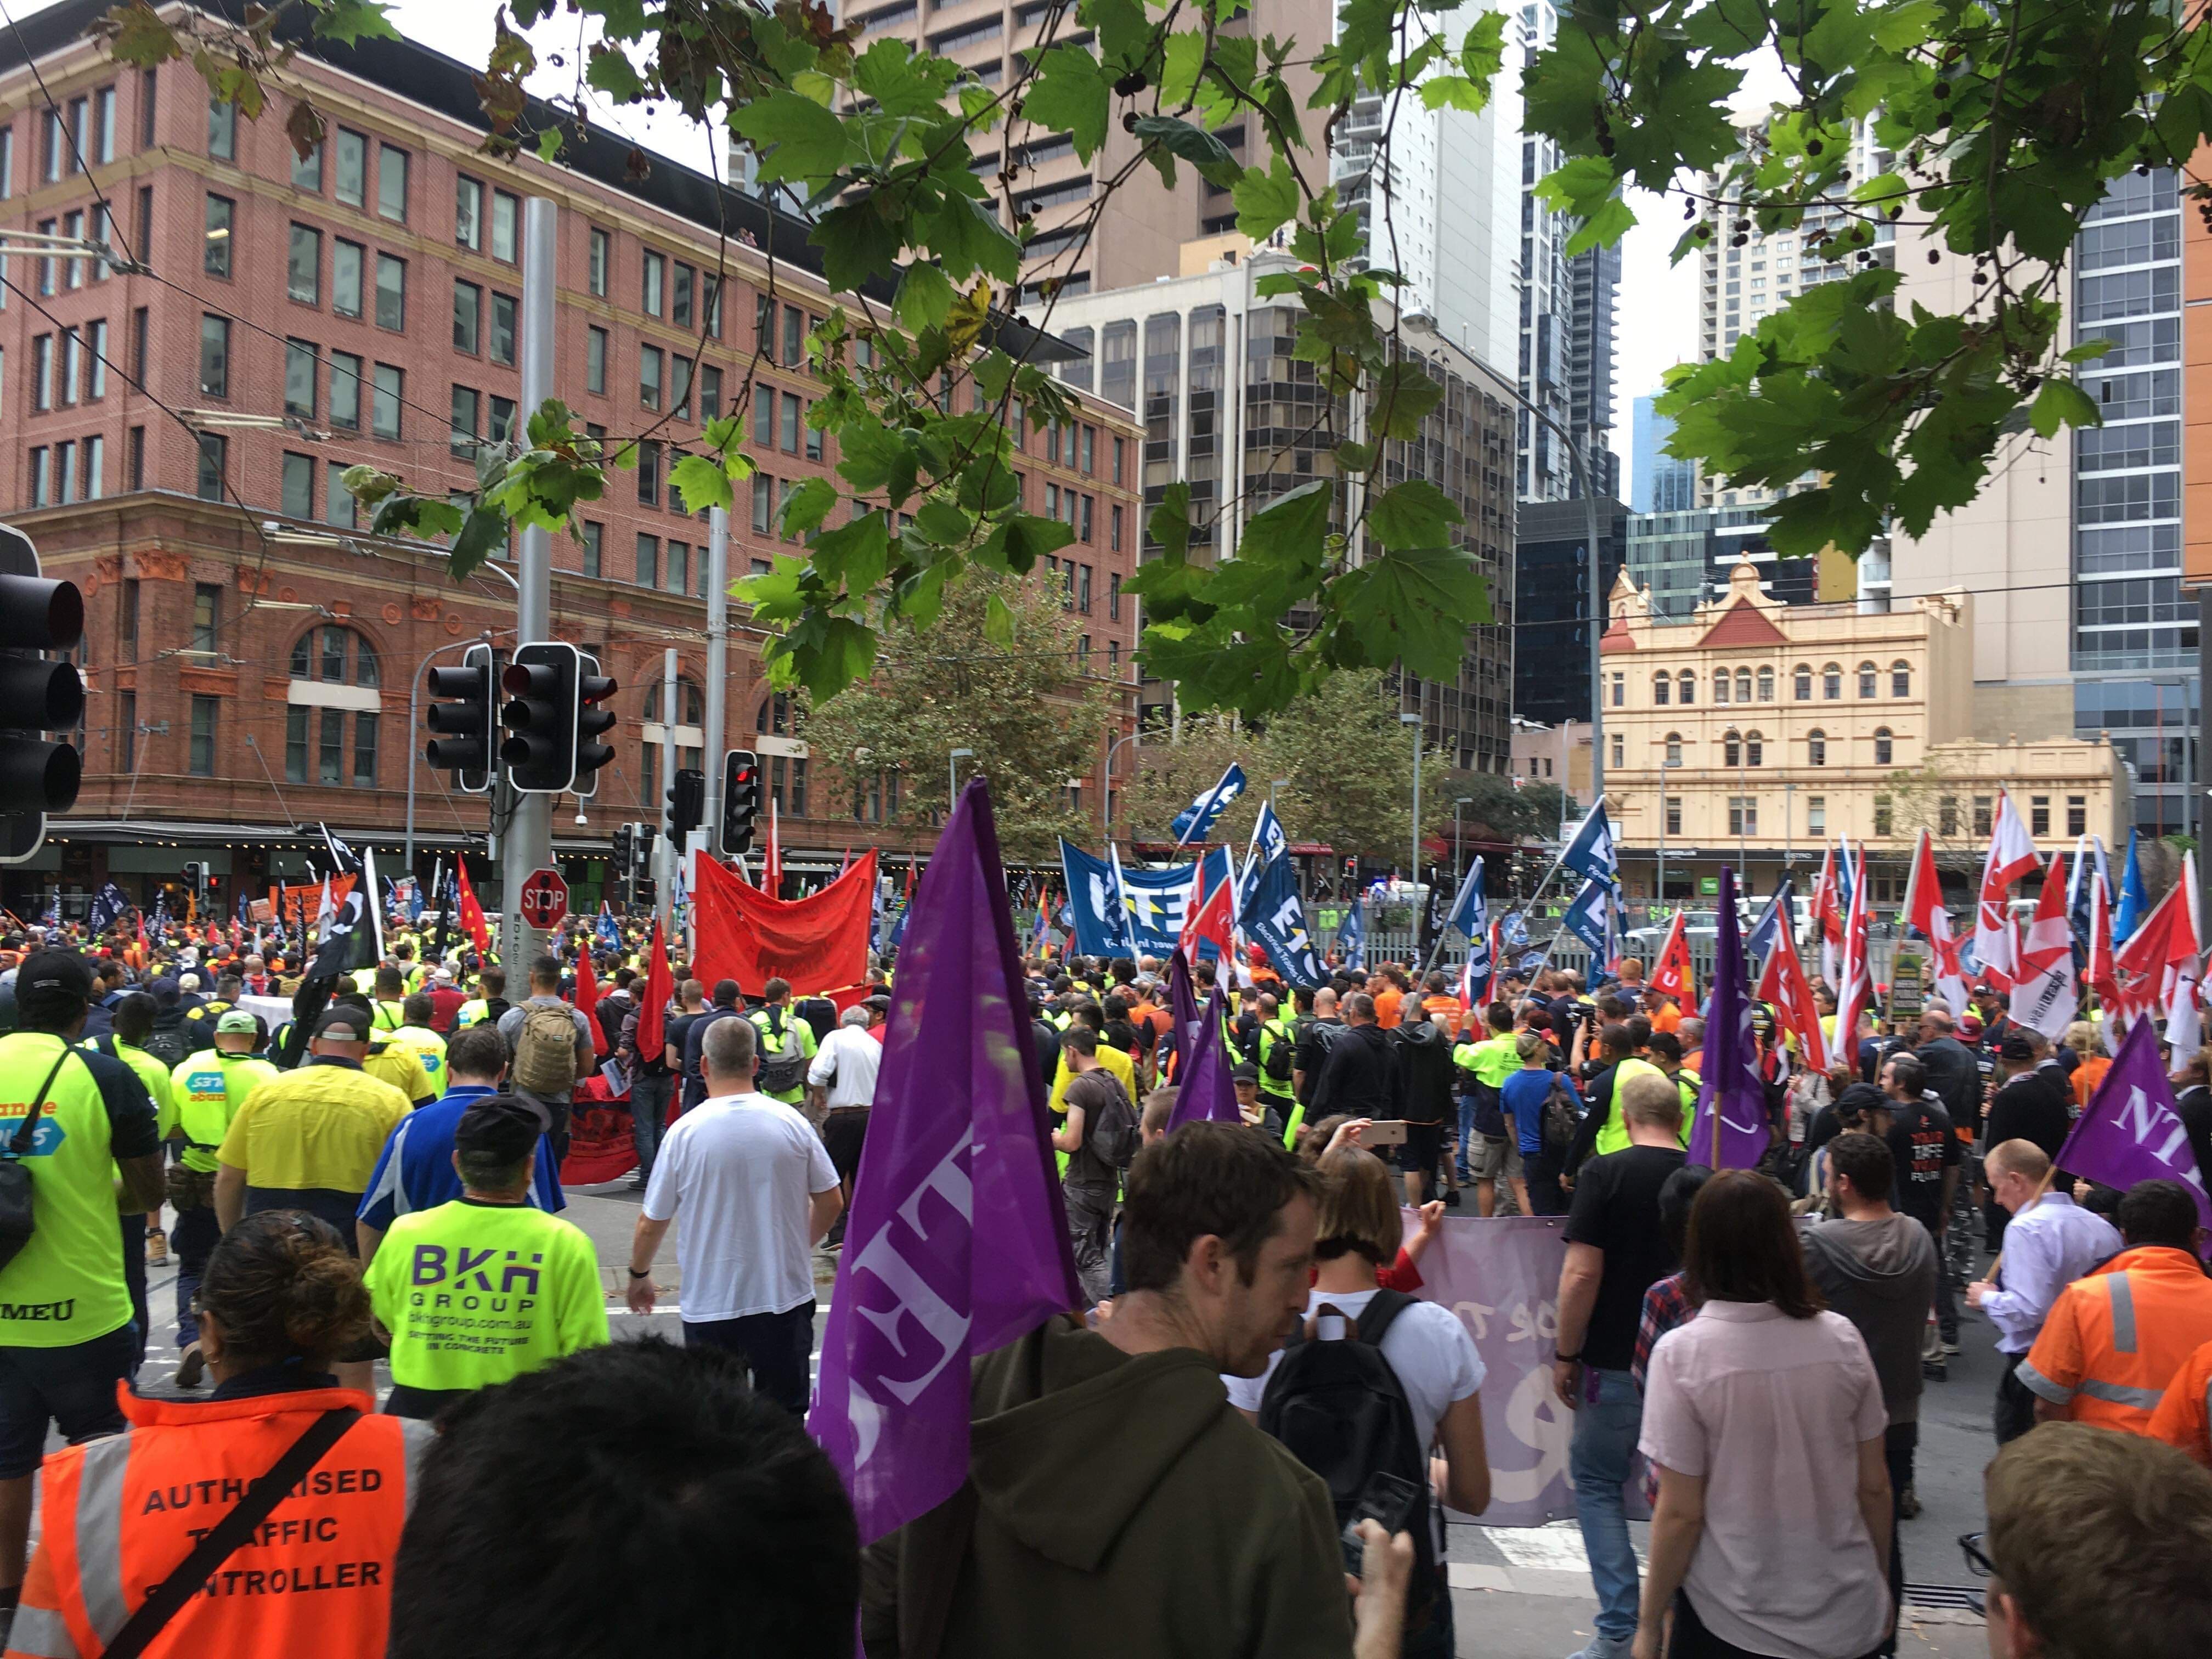 The crowd passes Central and Hay Street, shown in its full scale, with flags from various unions populating the image.